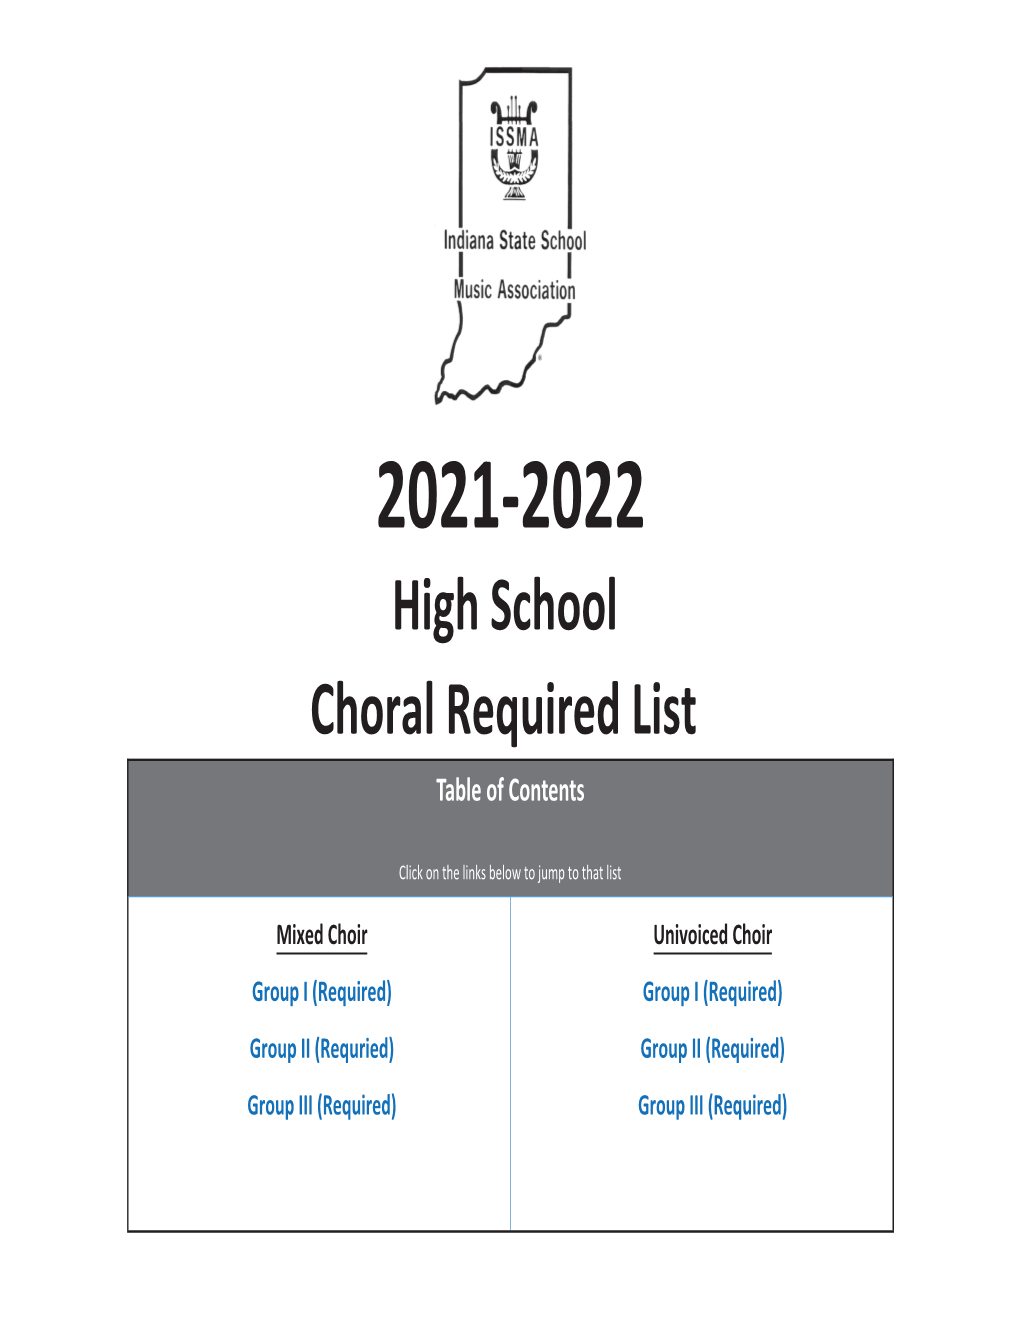 2021-2022 High School Choral Required List Table of Contents